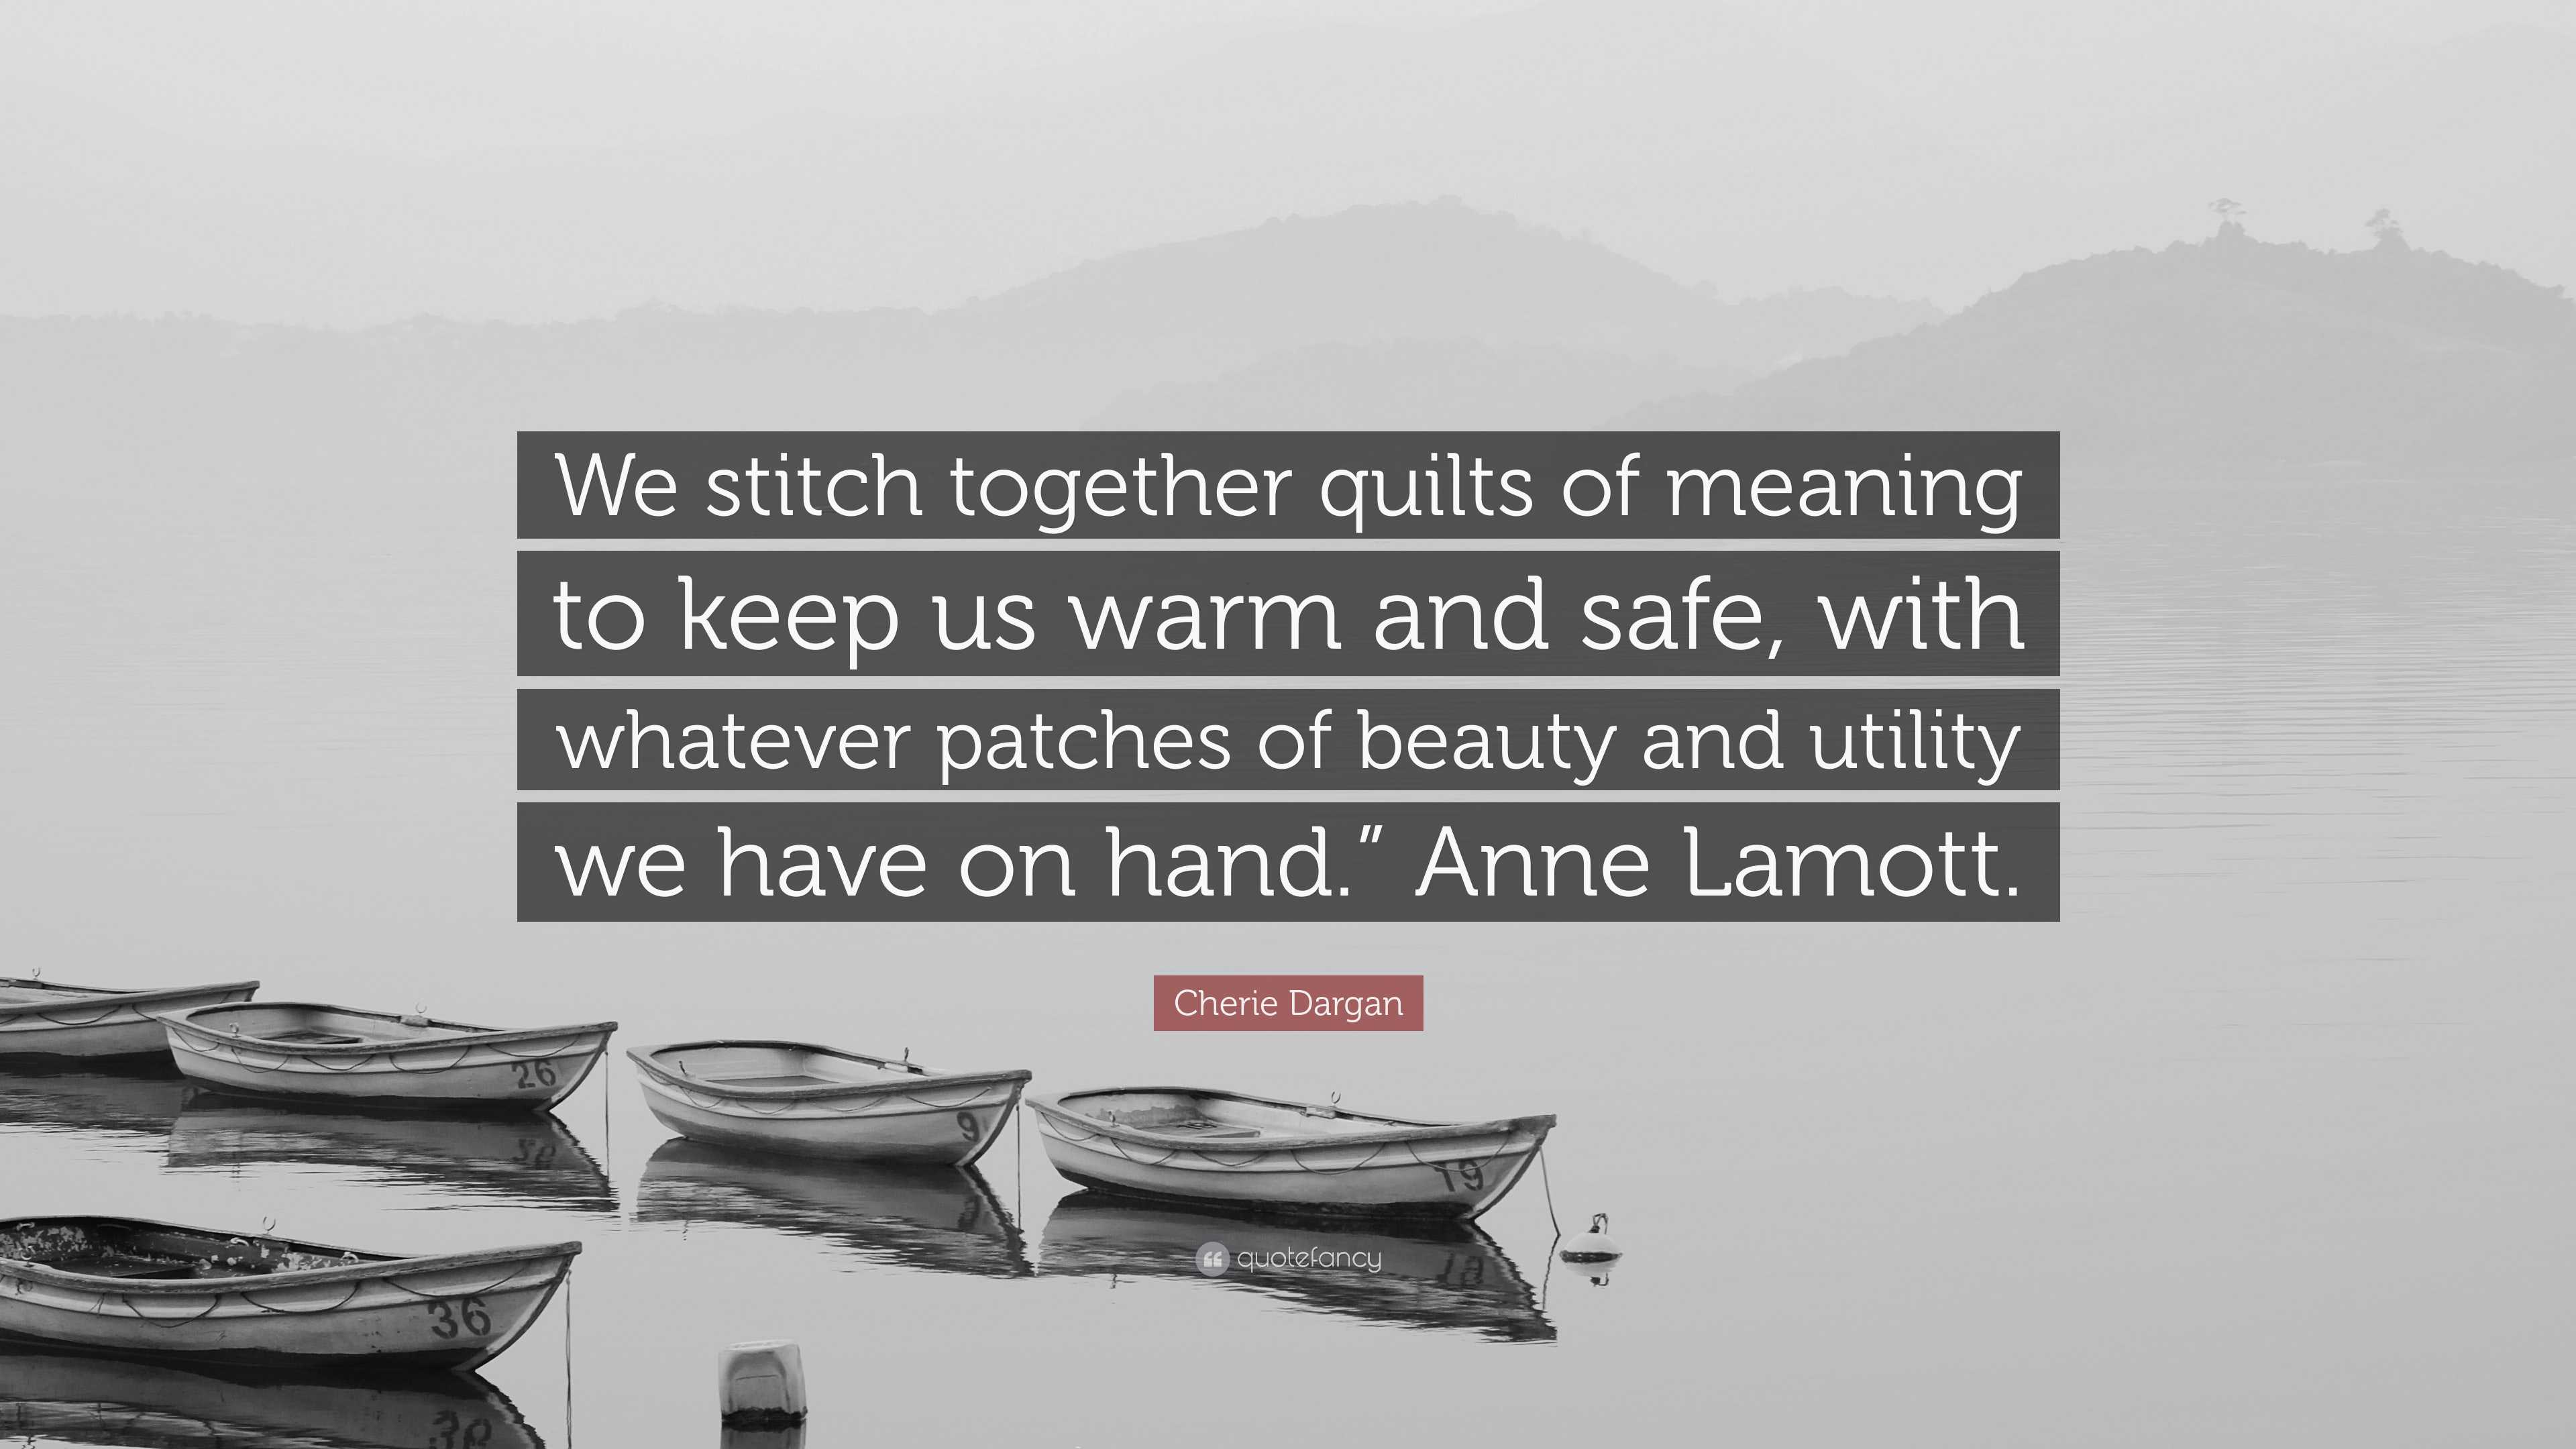 8072520 Cherie Dargan Quote We stitch together quilts of meaning to keep us warm and safe with